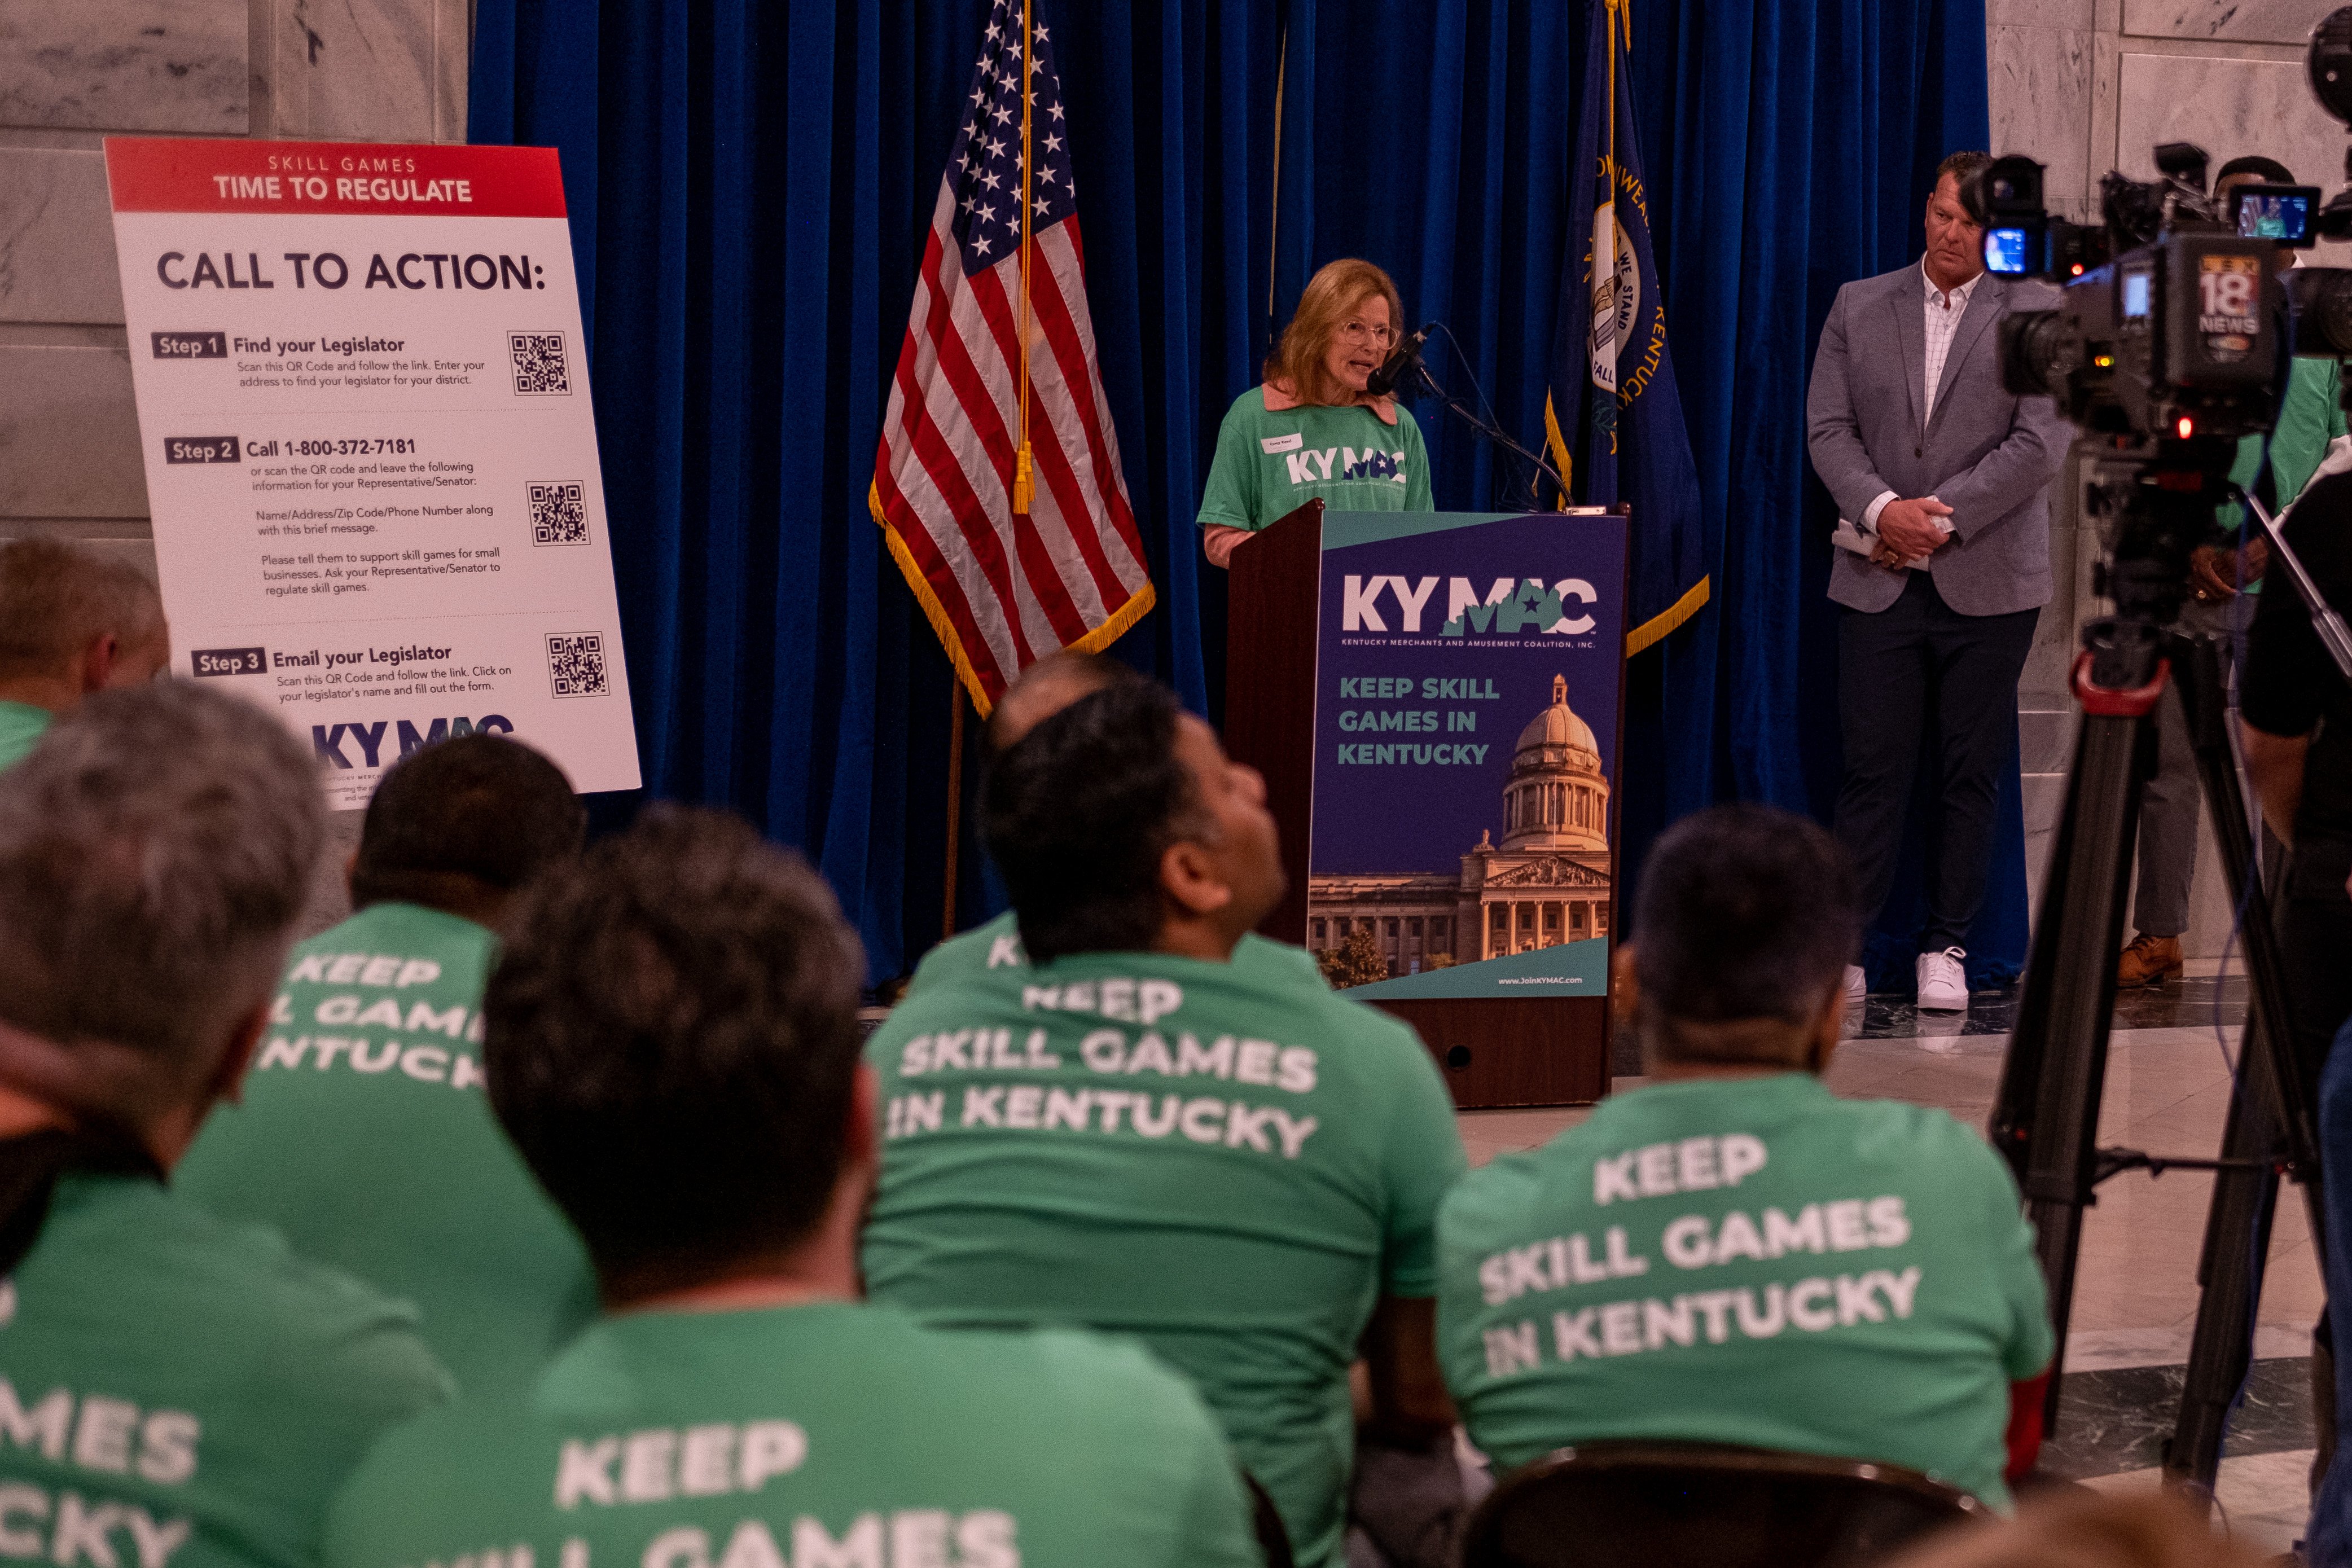 KYMAC members rally at state capital in support of skill games